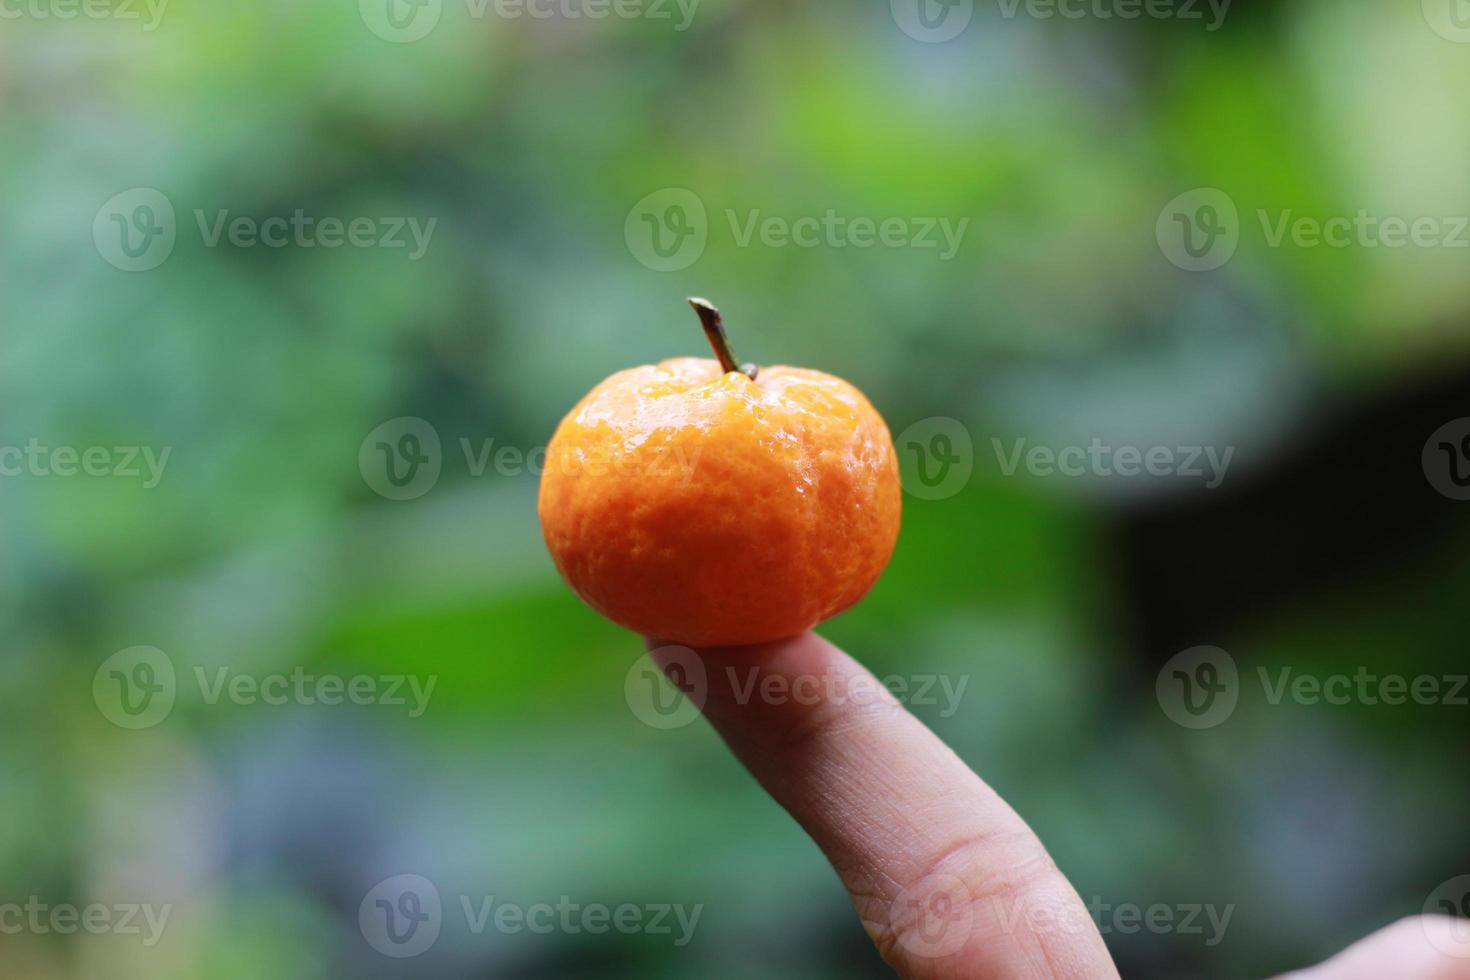 a close up of mini citrus fruits placed on fingertips with trees in the background. fruit photo concept.